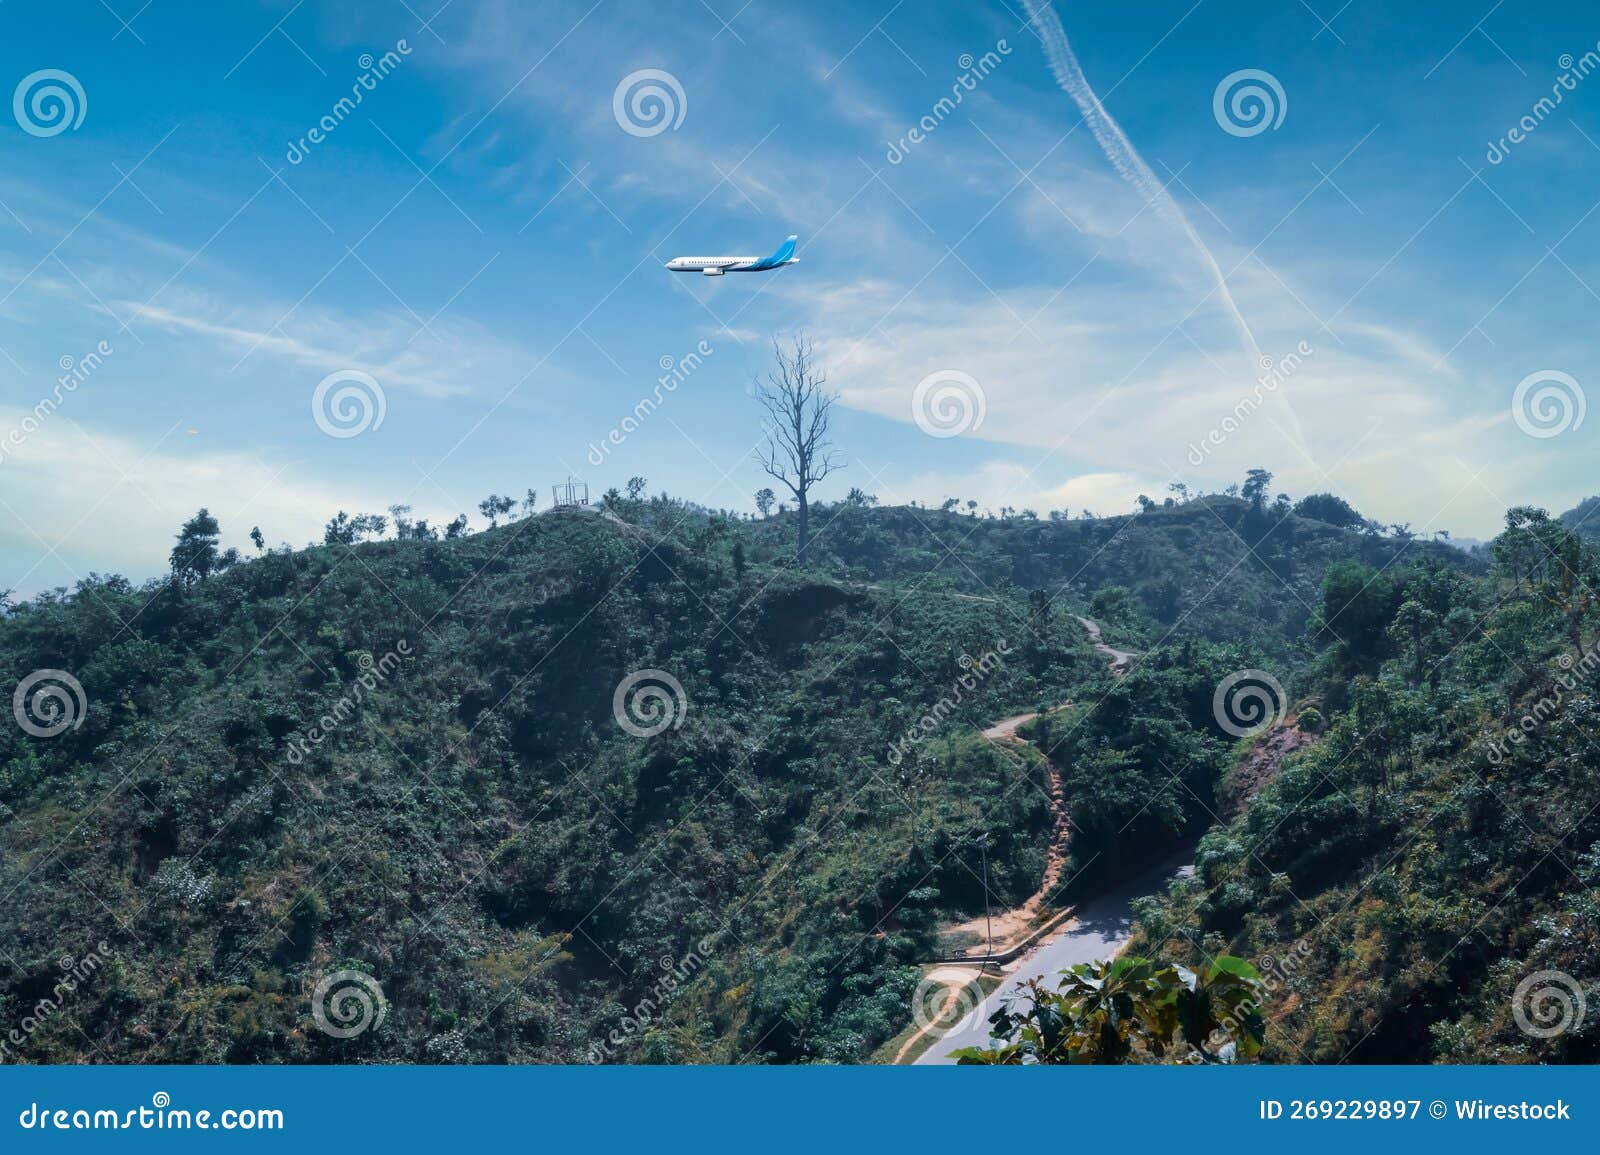 Plane Flying Over Beautiful Mountains, Trees, Hills on a Sunny Day ...